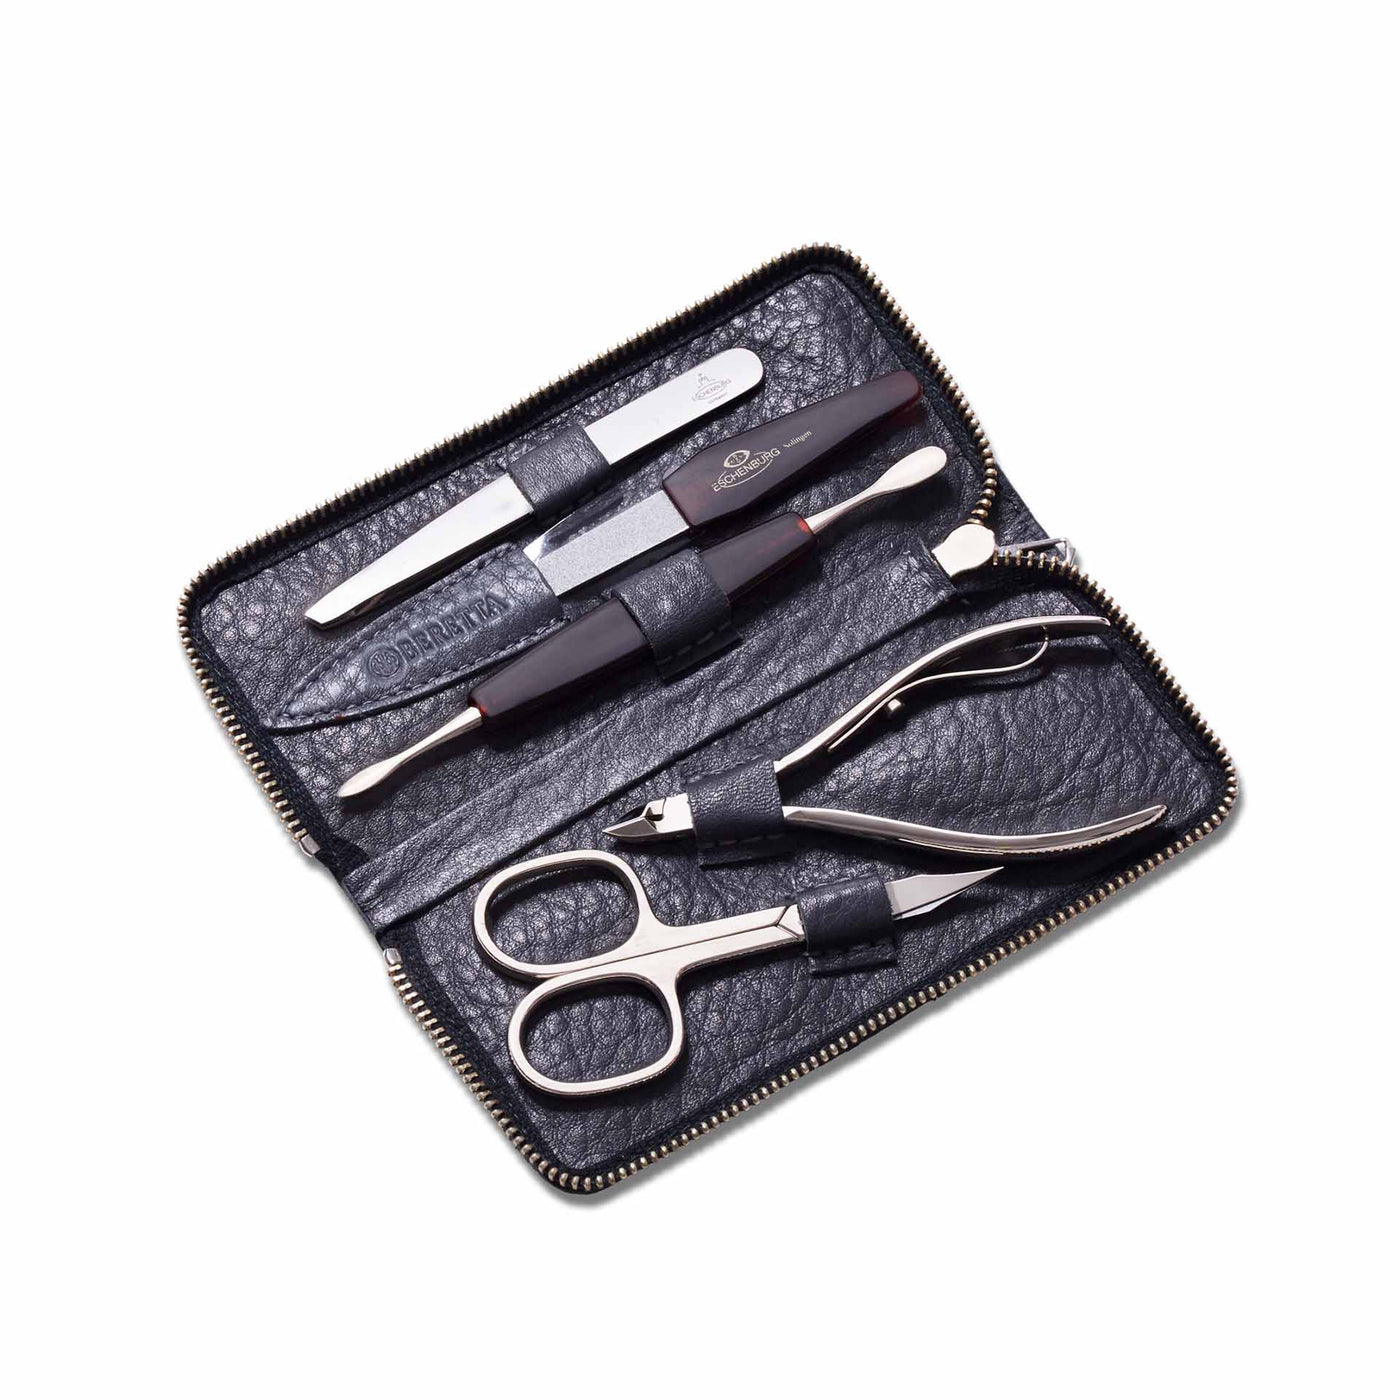 Nickleplated Personal Grooming Set with Leather Travel Holder - Grey